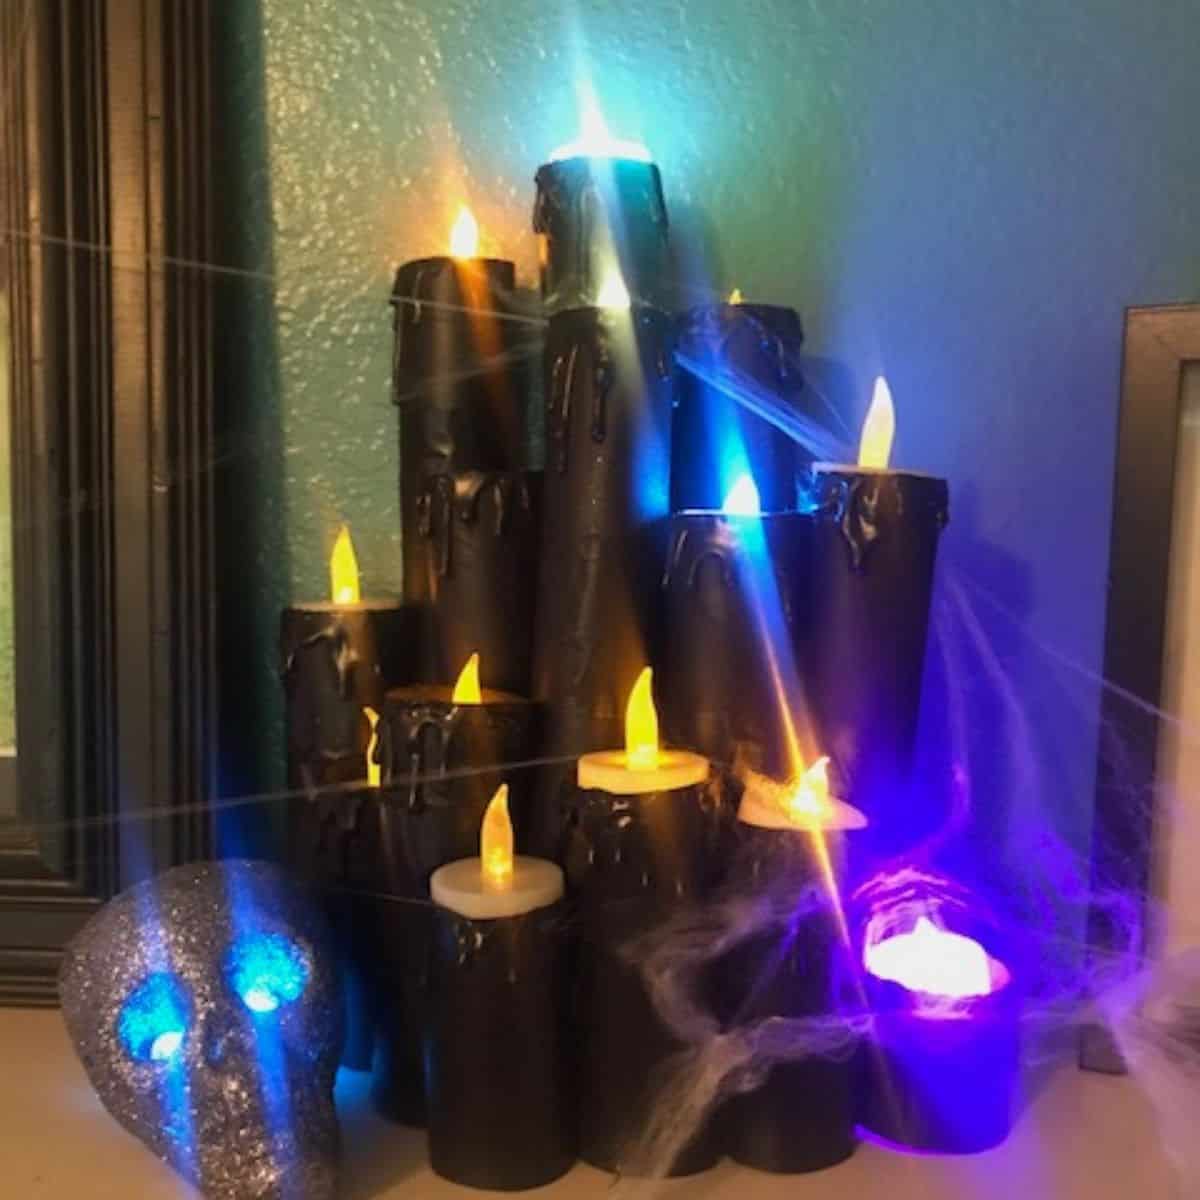 DIY Fake Halloween Toilet Paper Roll Candles